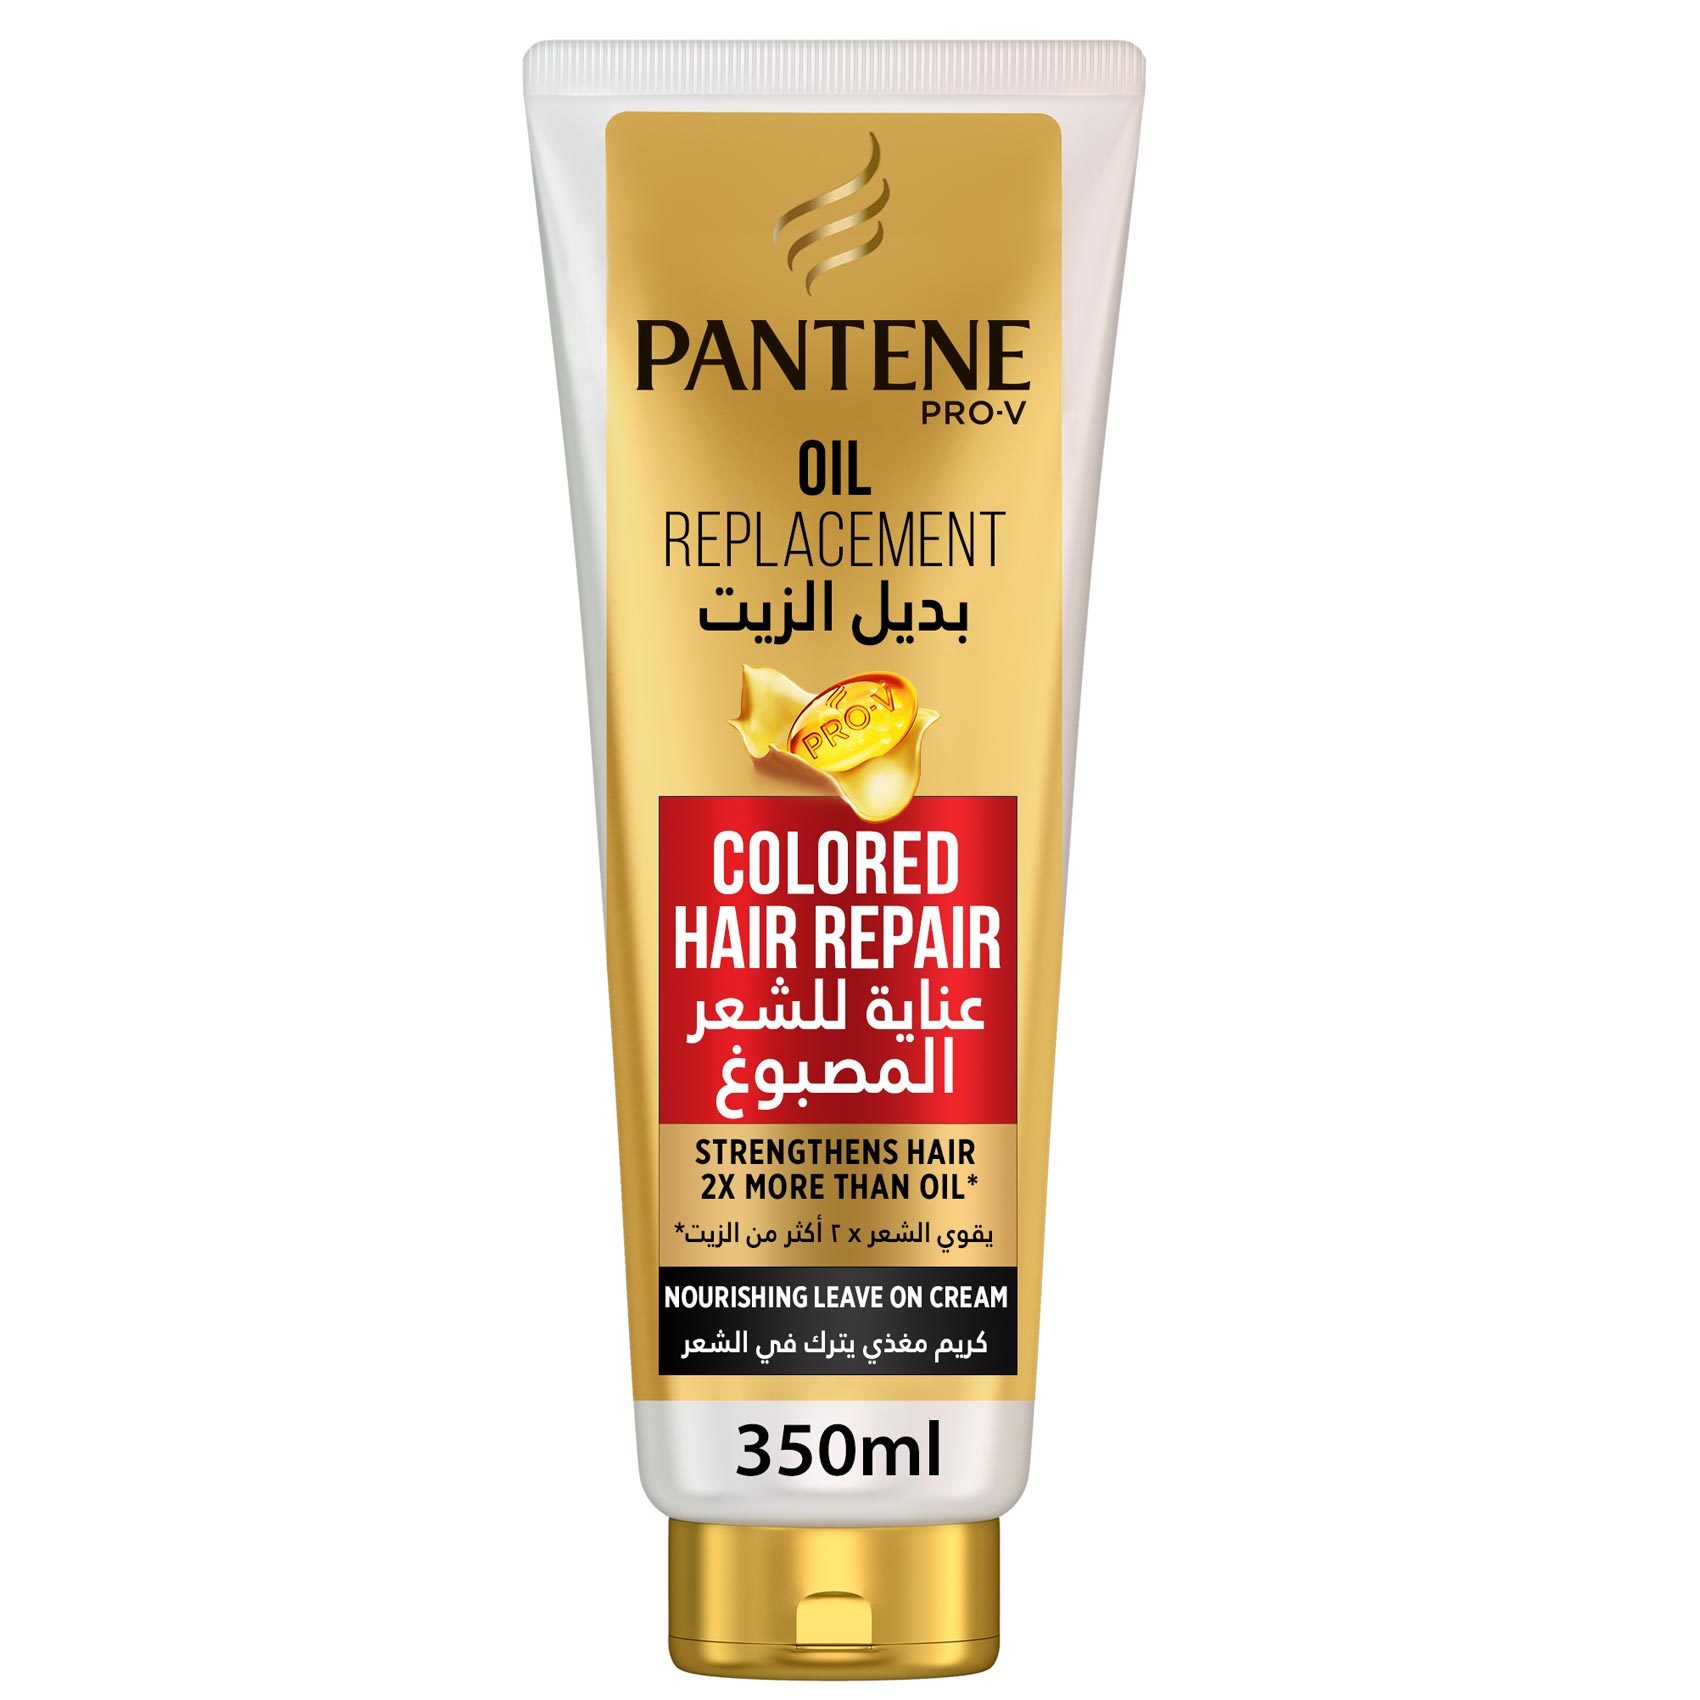 Buy Pantene Pro V Colored Hair Repair Oil Replacement 350ml Online Shop Beauty Personal Care On Carrefour Uae